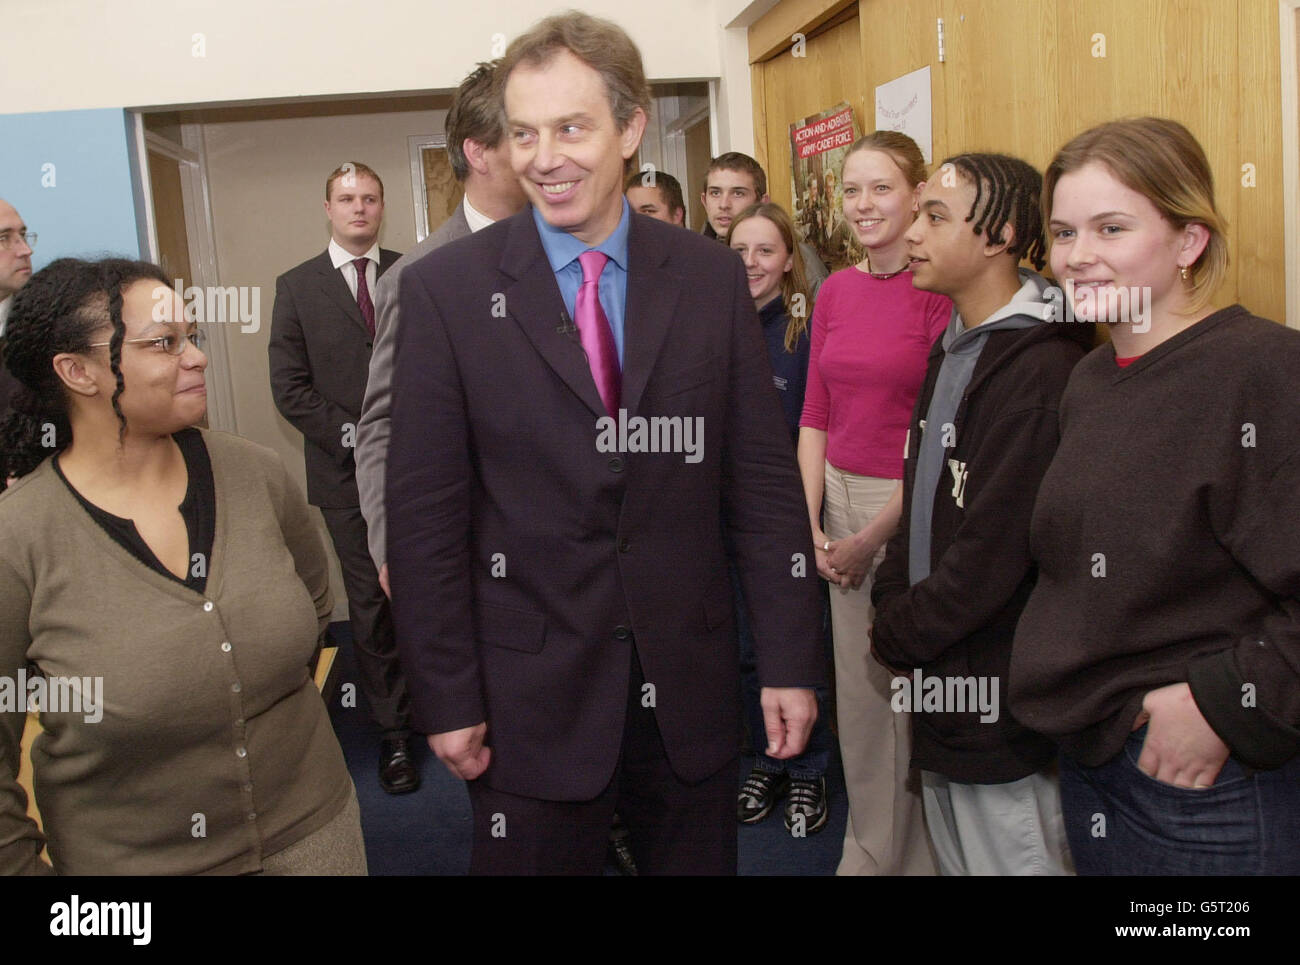 Prime Minister Tony Blair meets local residents at Waddon Youth Centre in Croydon, south London where he discussed ways of keeping young people off the streets. He was in the S London borough to launch Labour's local election campaign. Stock Photo